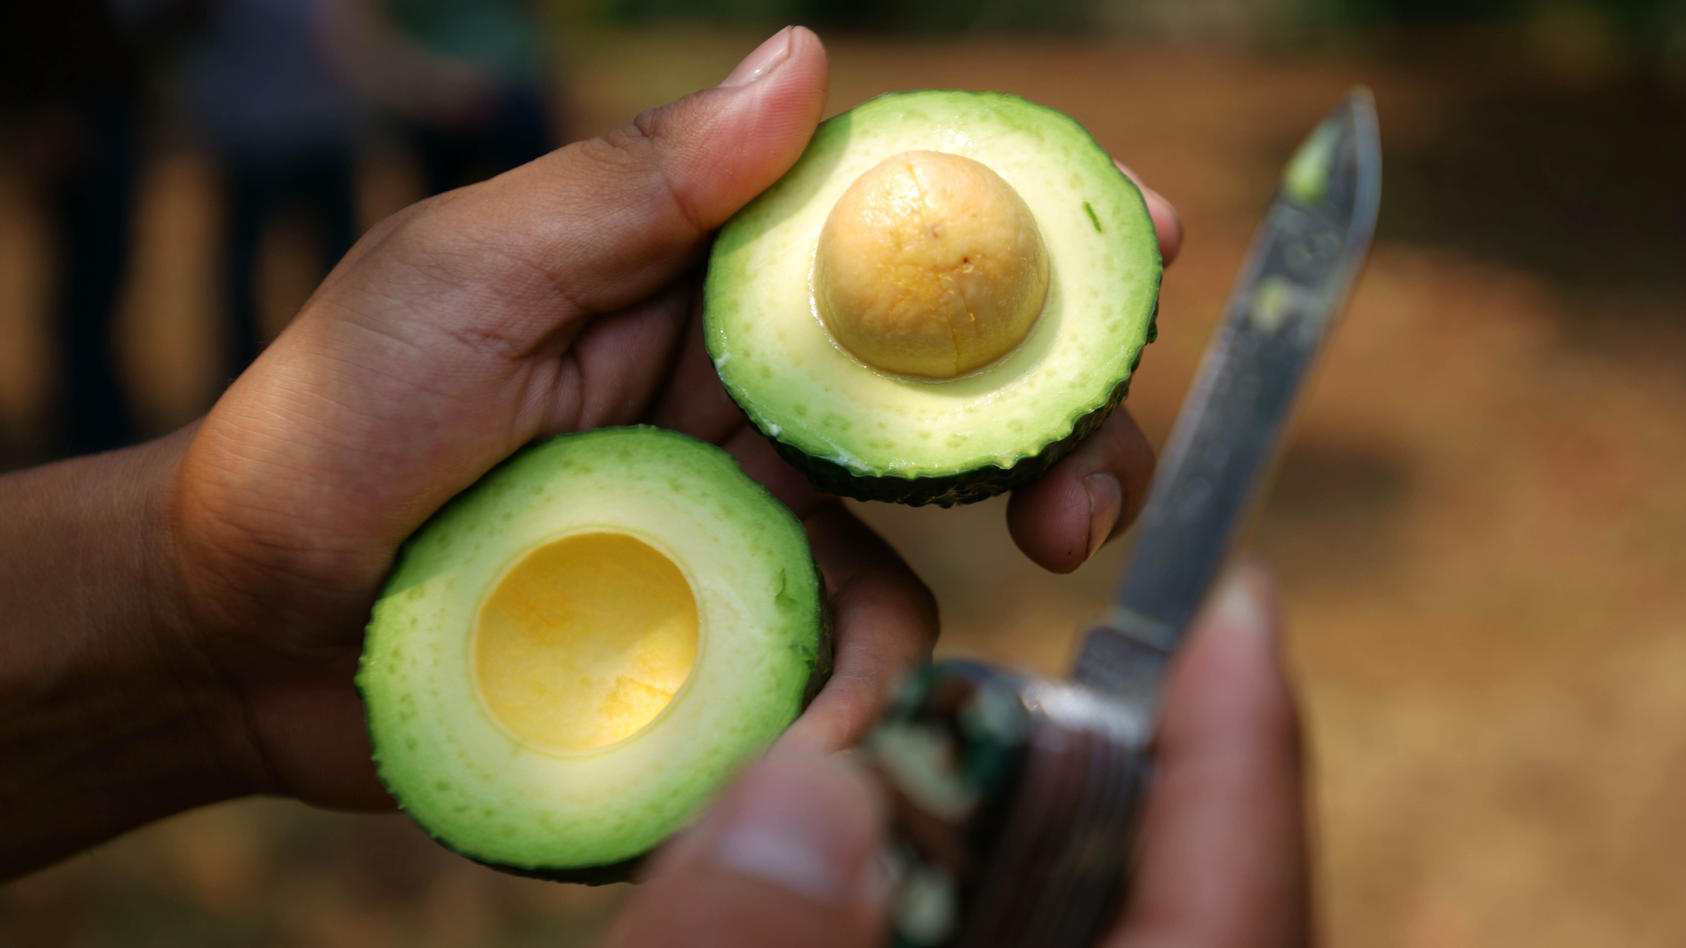 ichoacan produced nearly 1.5 million tons of avocado in 2016, according to the federal government's annual agricultural records. Uruapan, accounted for 10.5 percent of the state's total production of the so-called "green gold," as the vegetable-like